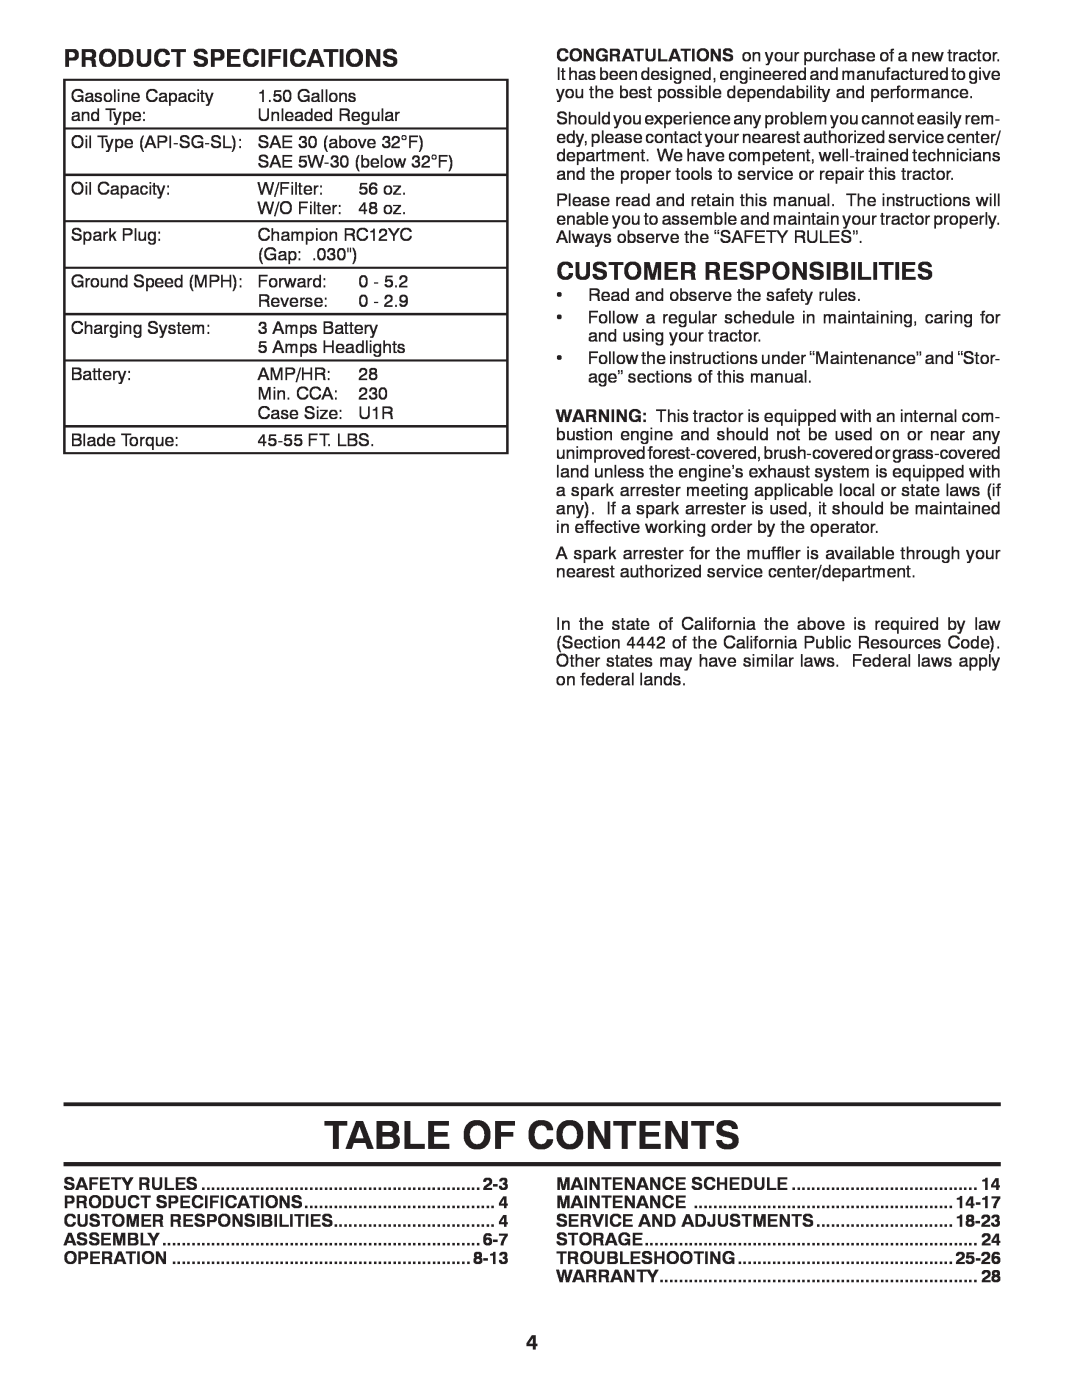 Poulan 532 43 84-93, 96048001800 manual Table Of Contents, Product Specifications, Customer Responsibilities 